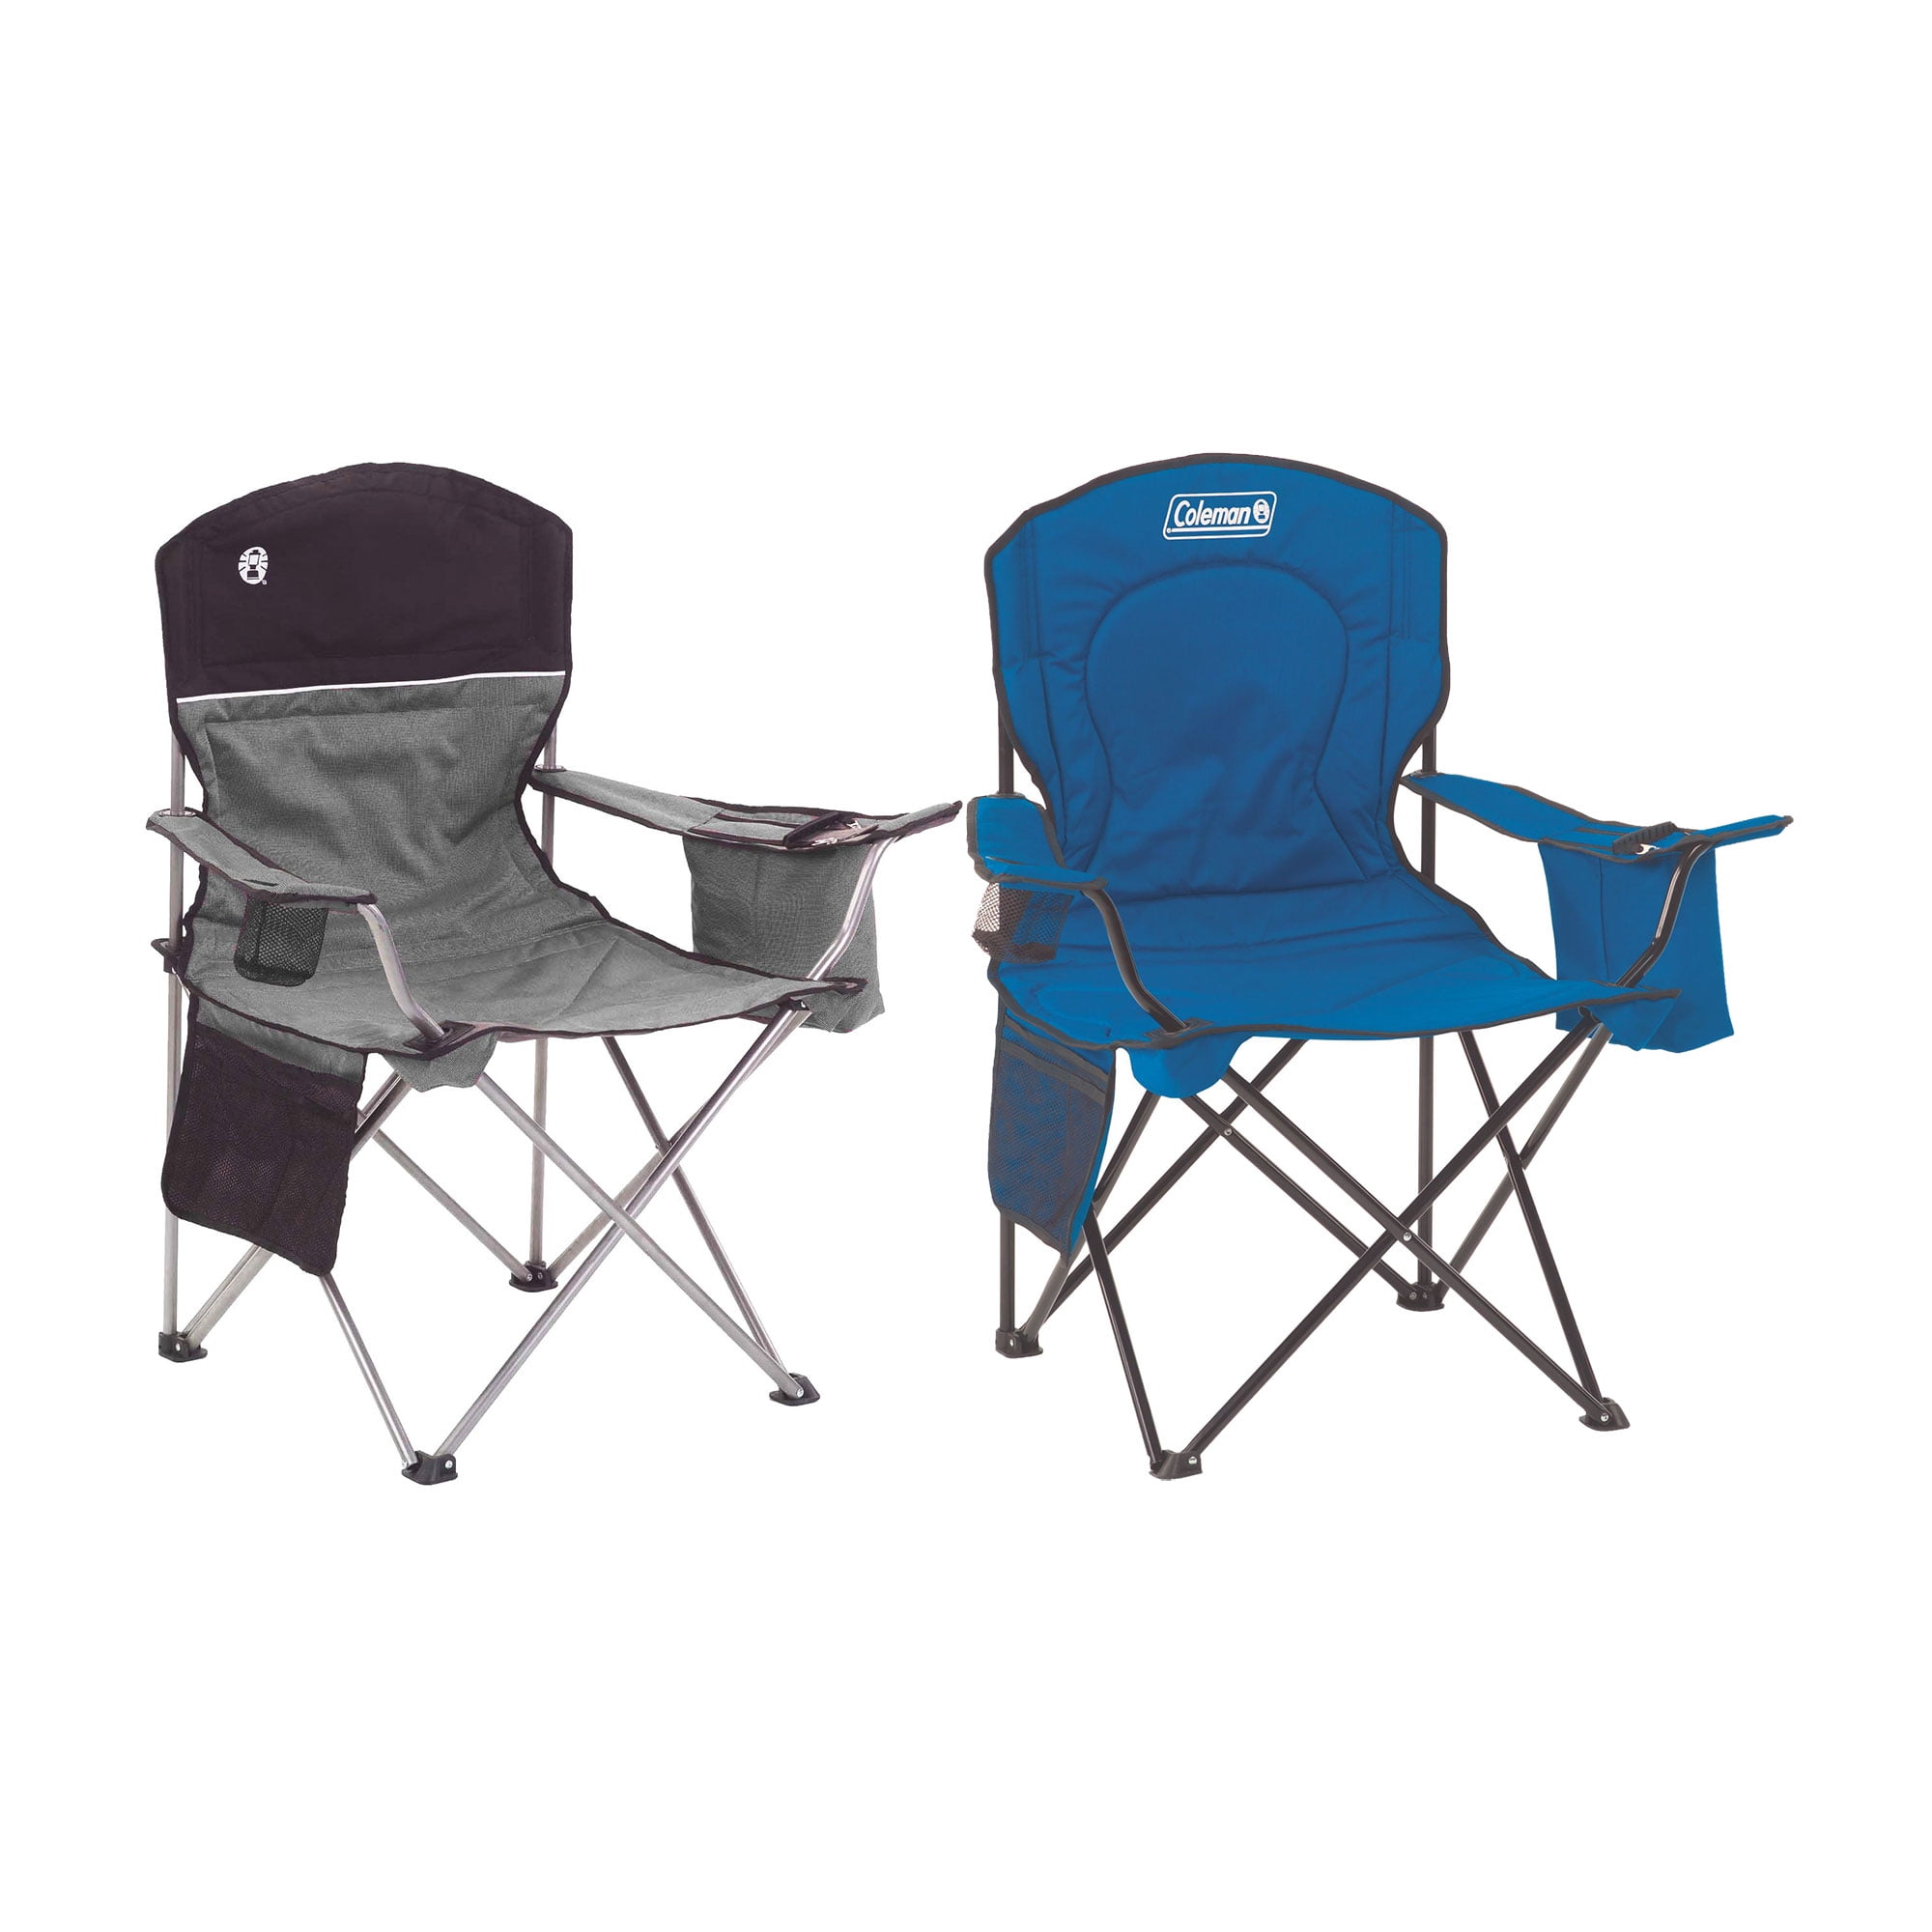 Coleman 2000020256 Portable Comfort Cup Holder Oversized Quad Chair w/ Cooler 